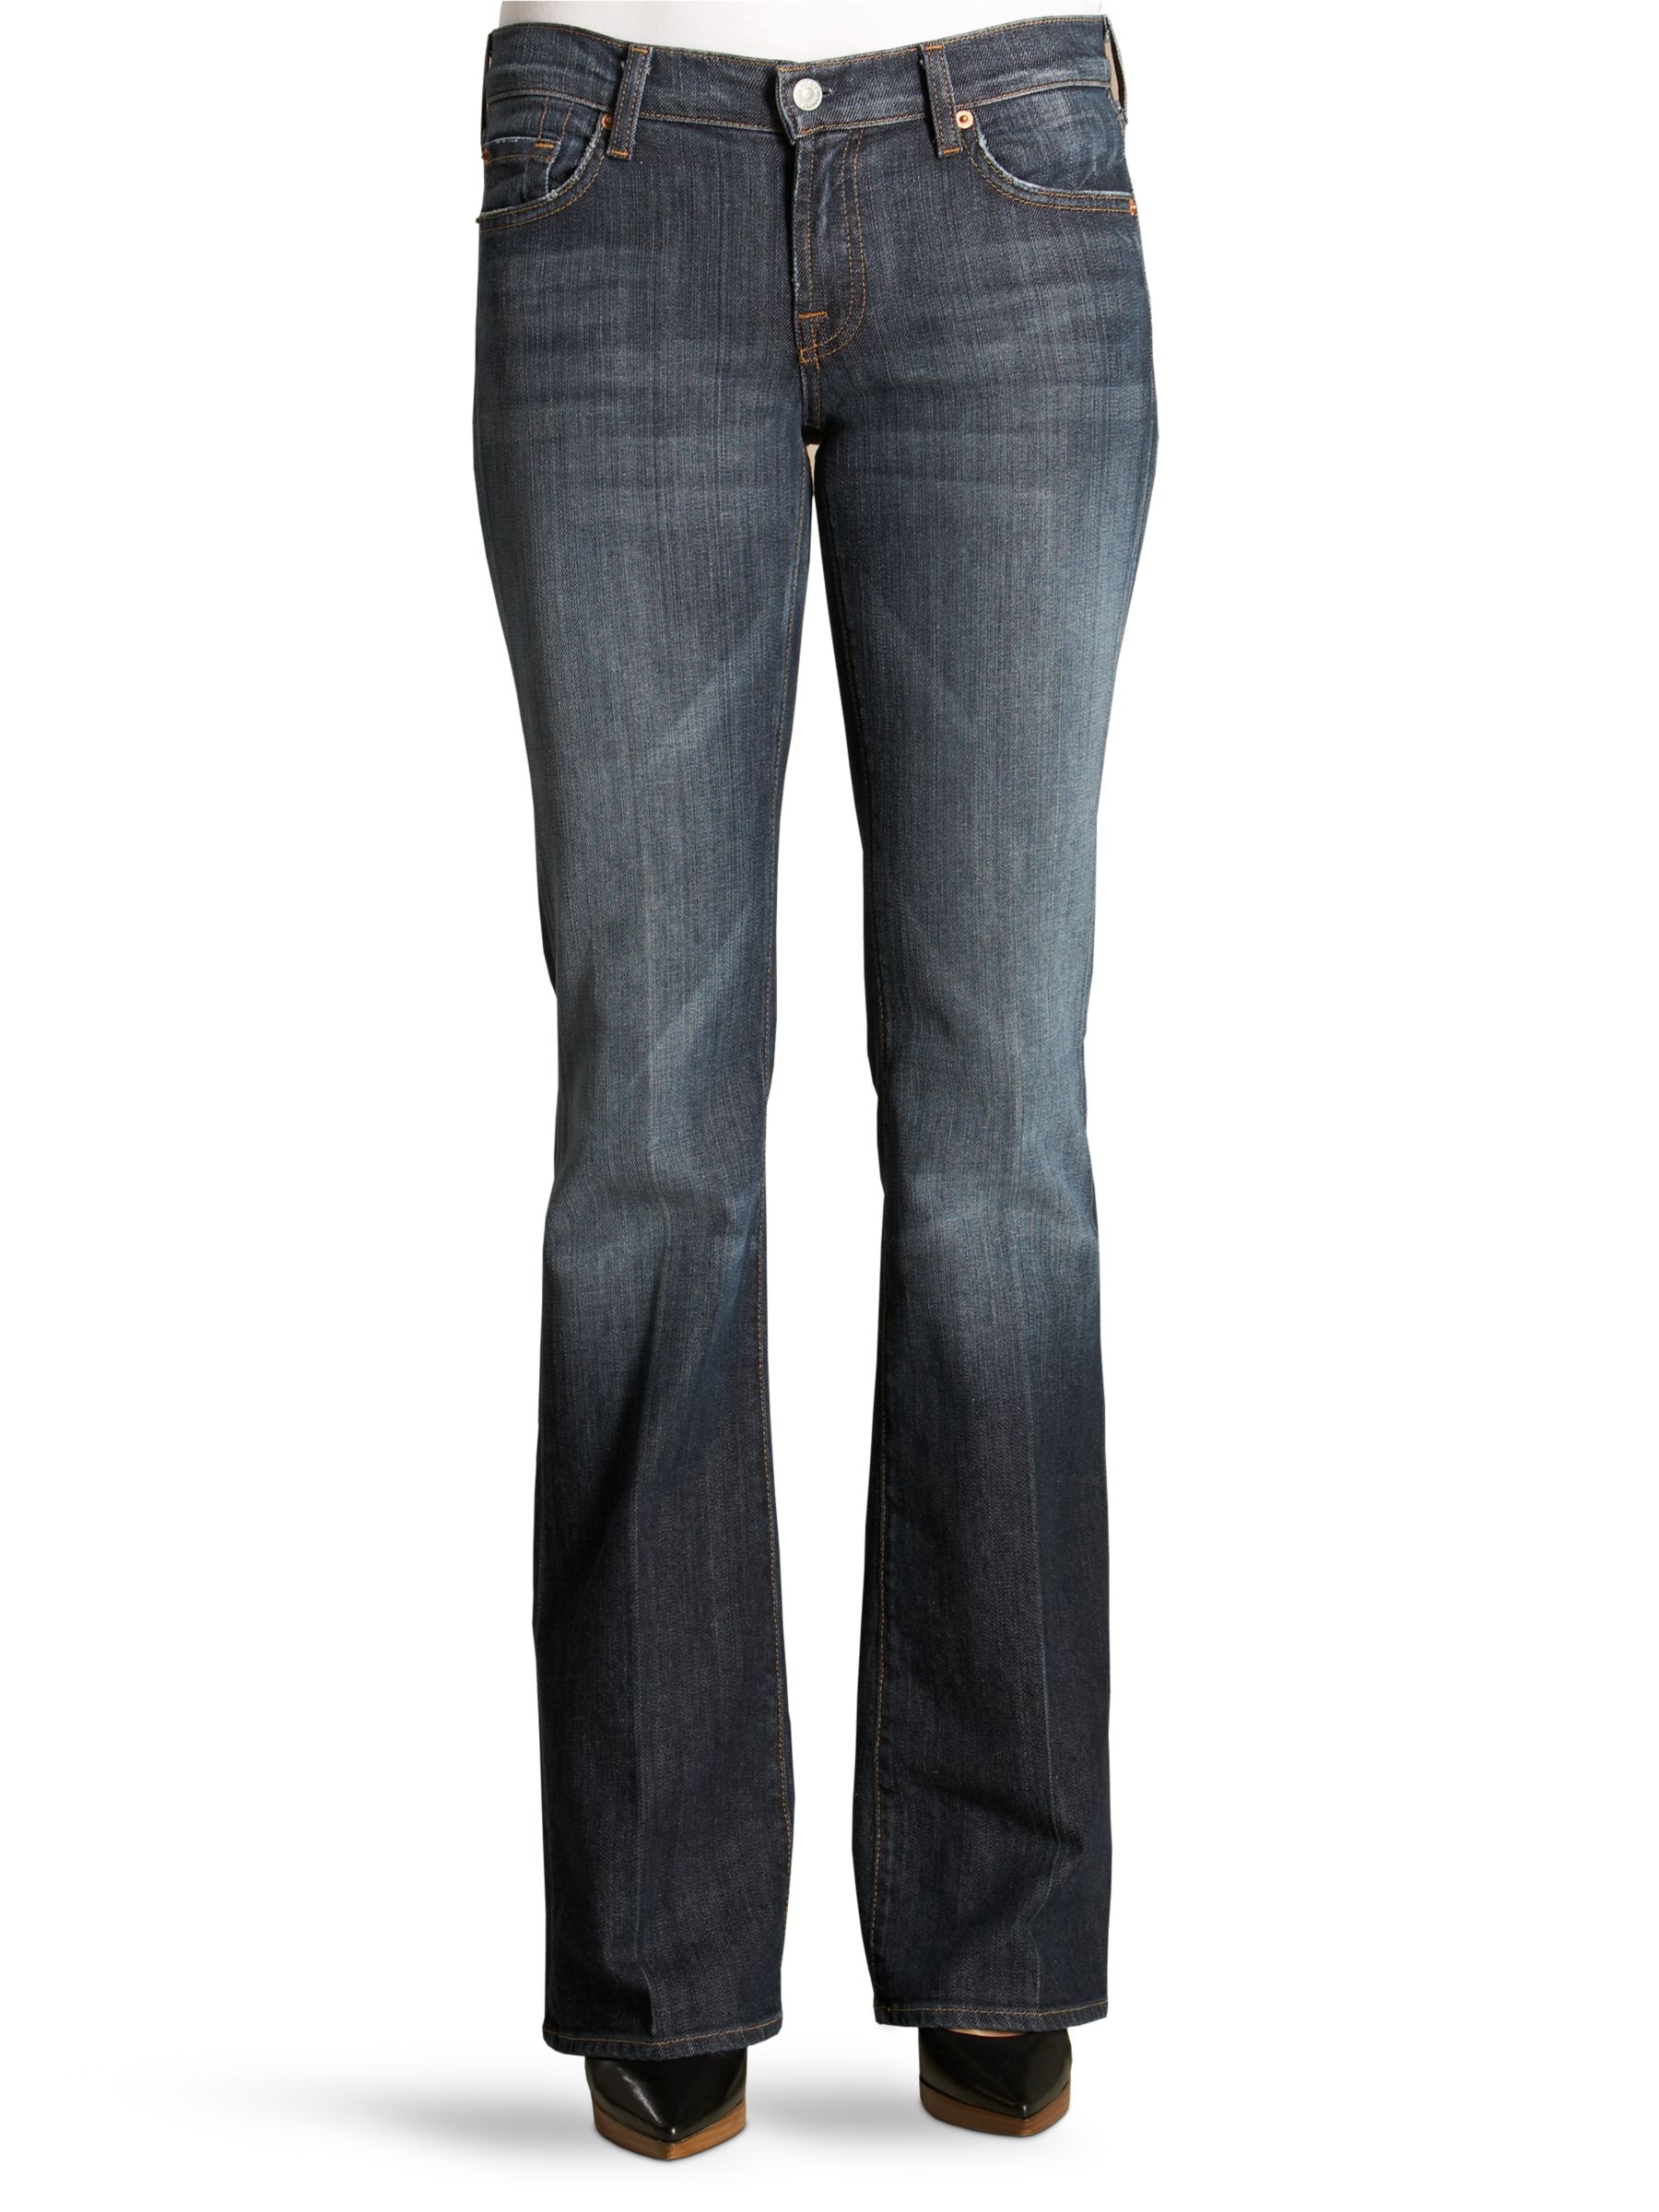 7 For All Mankind Flare Jeans, New York Dark at John Lewis